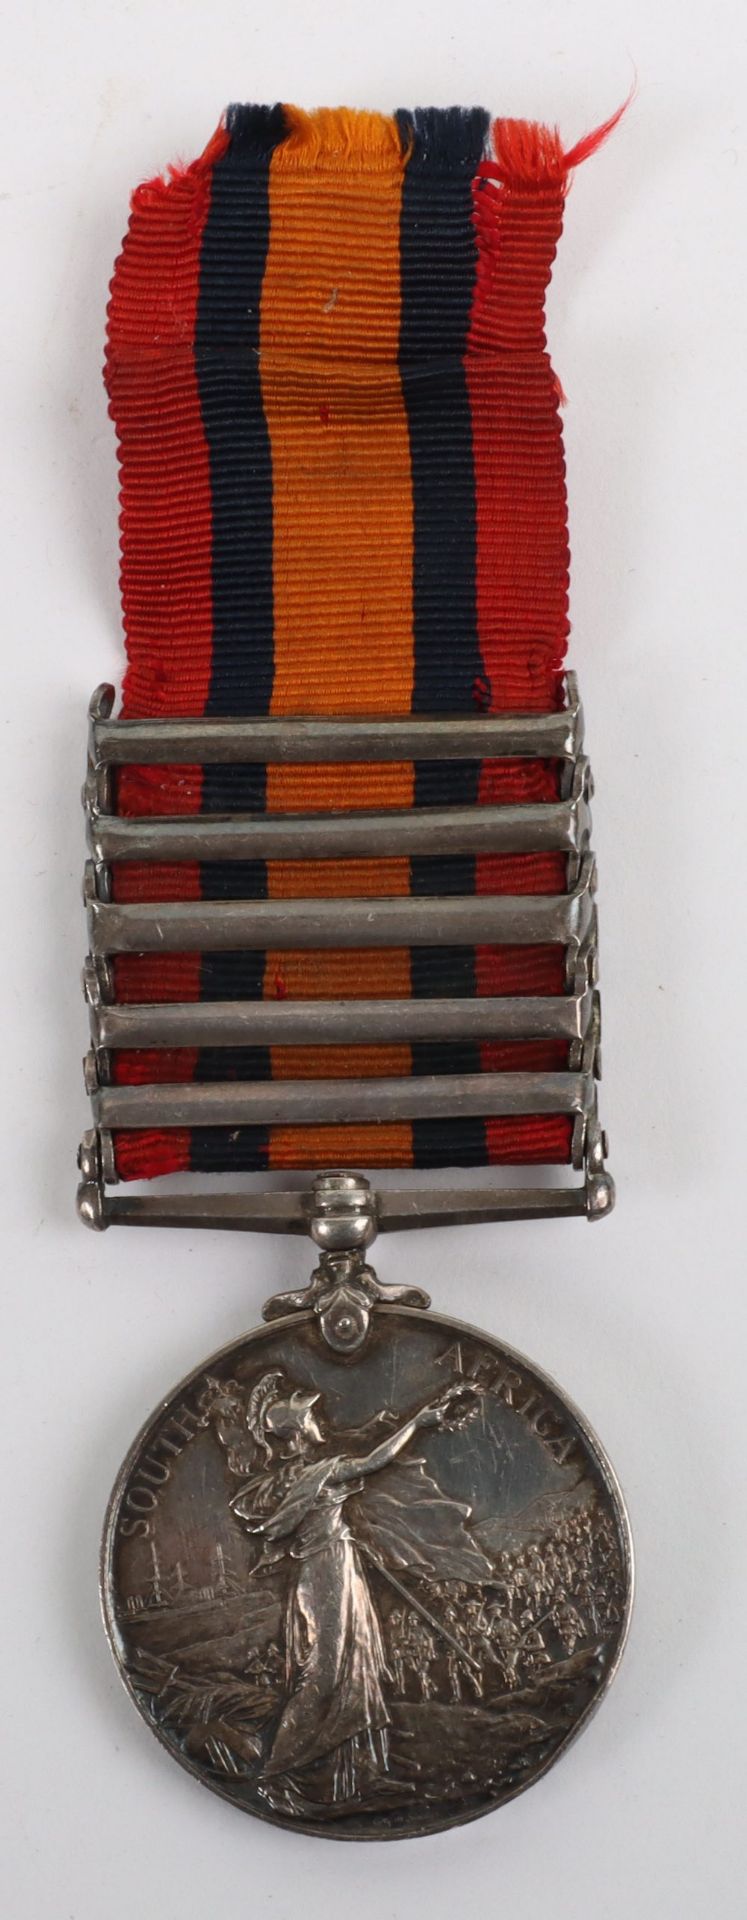 Queens South Africa Medal Army Post Office Corps - Image 3 of 4